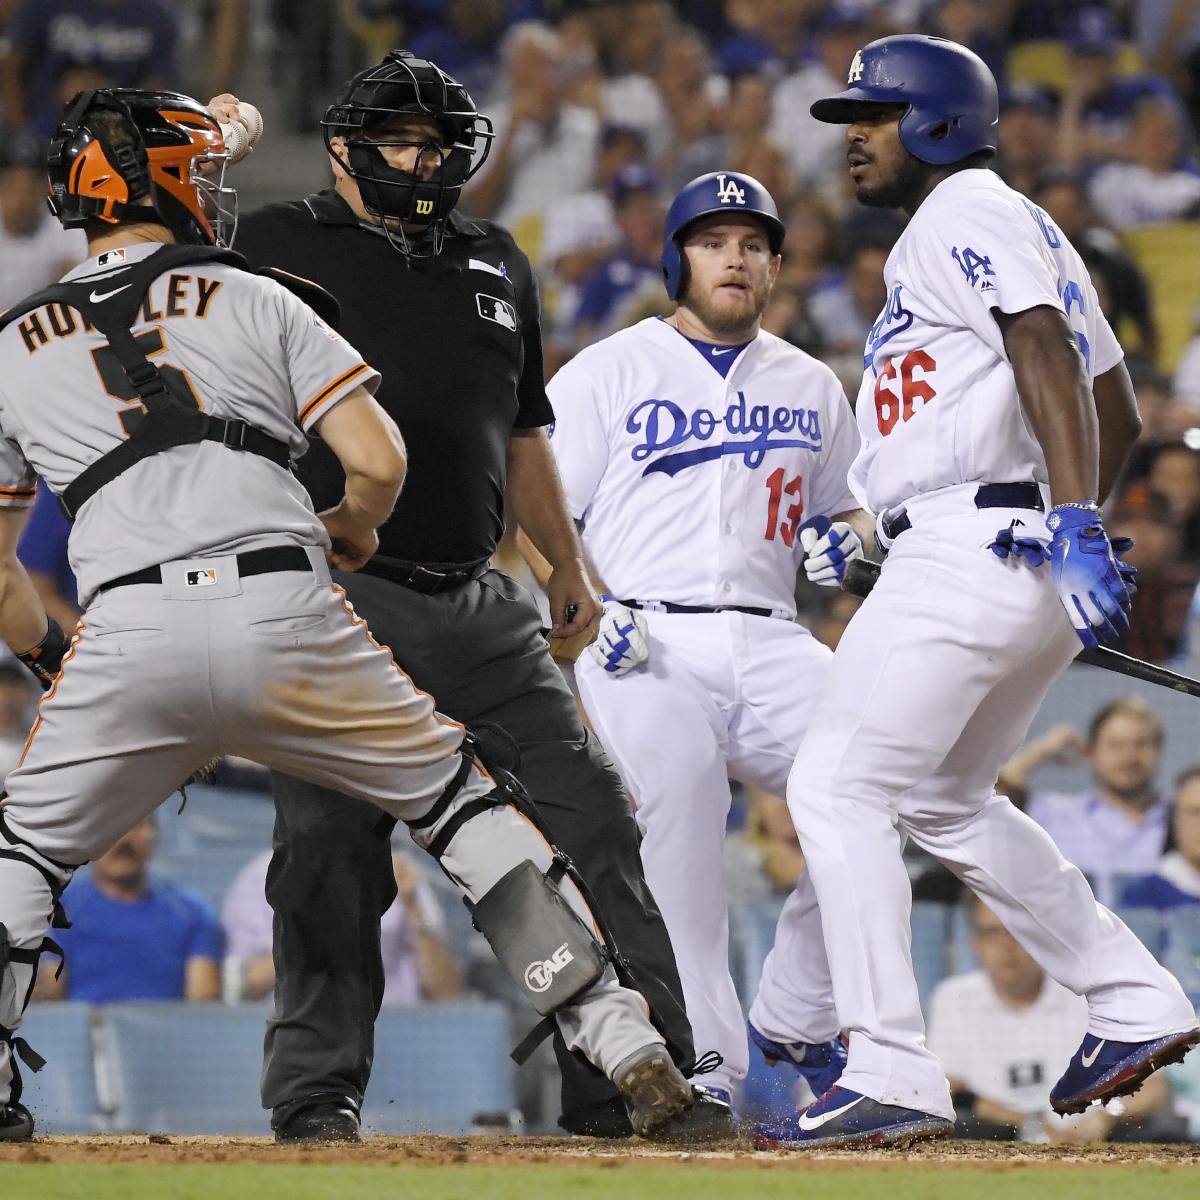 The Dodgers' Yasiel Puig writhes in pain after fouling off…